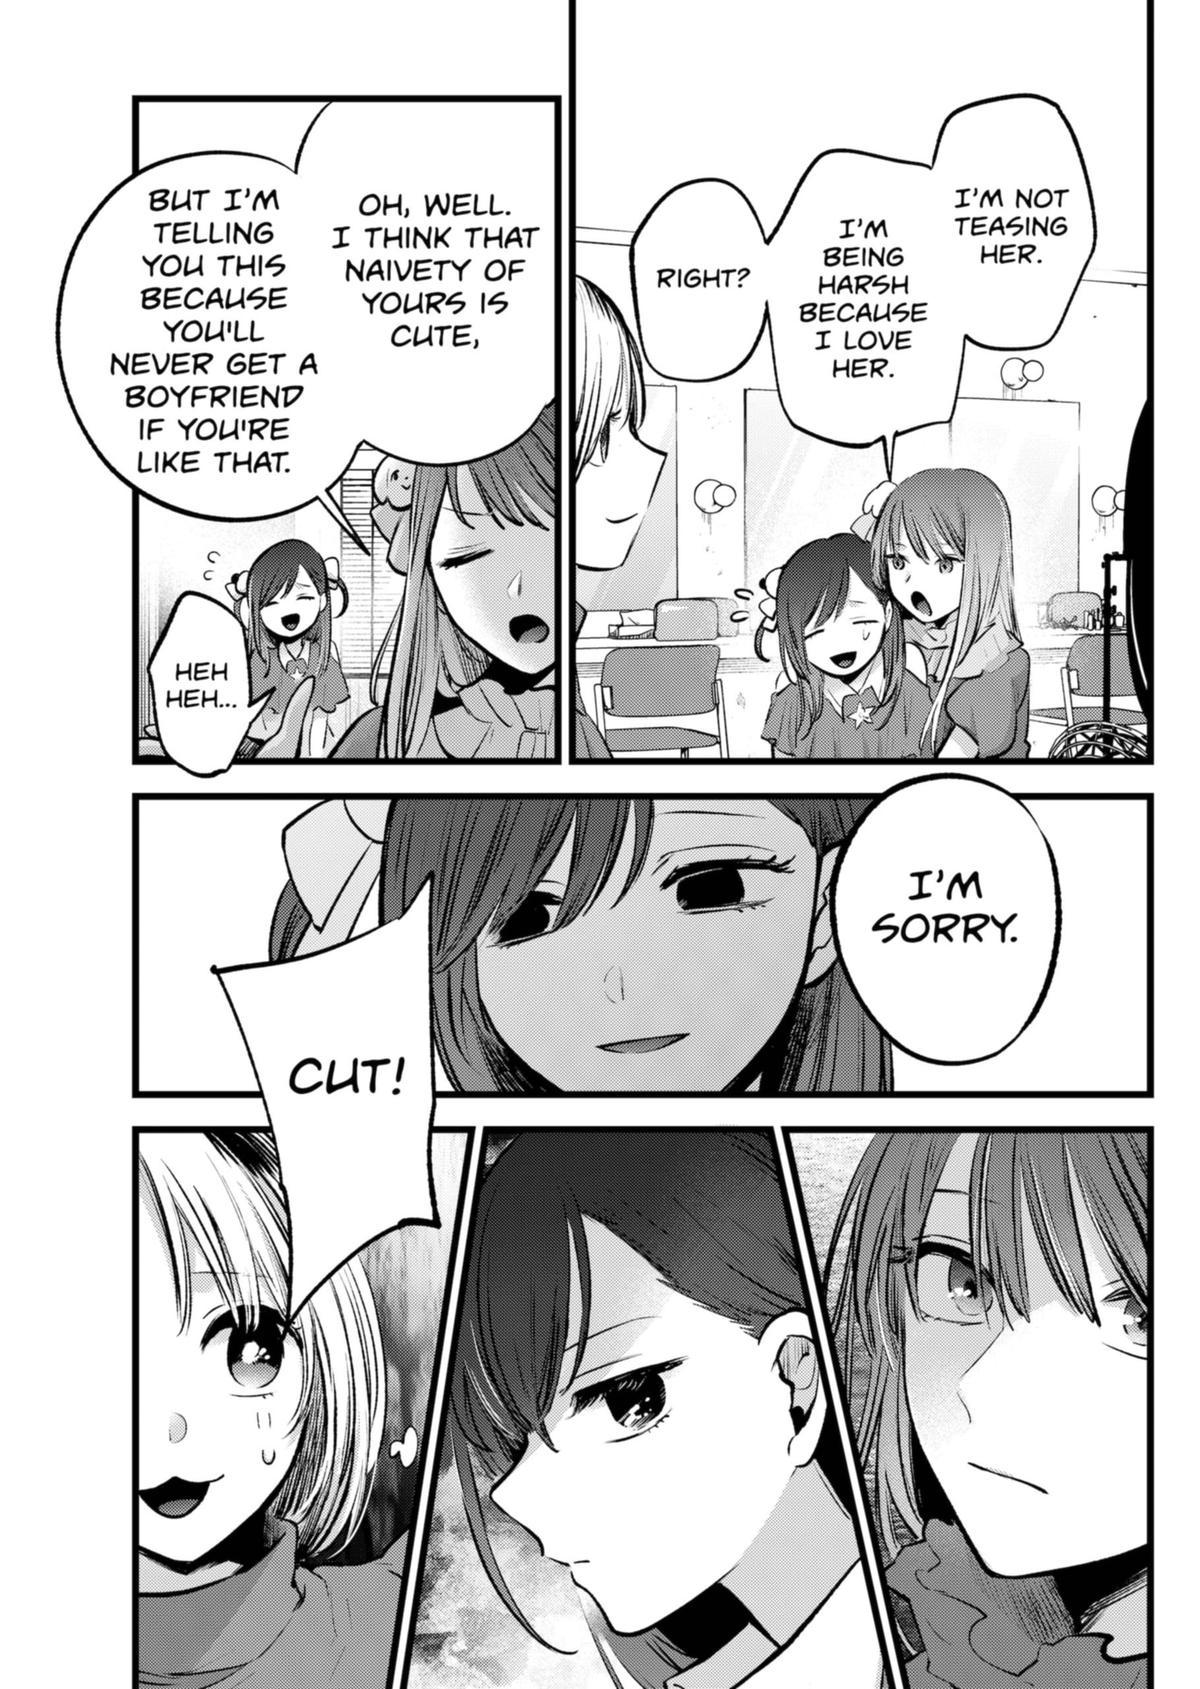 The Quintessential Quintuplets, Chapter 51 - English Scans